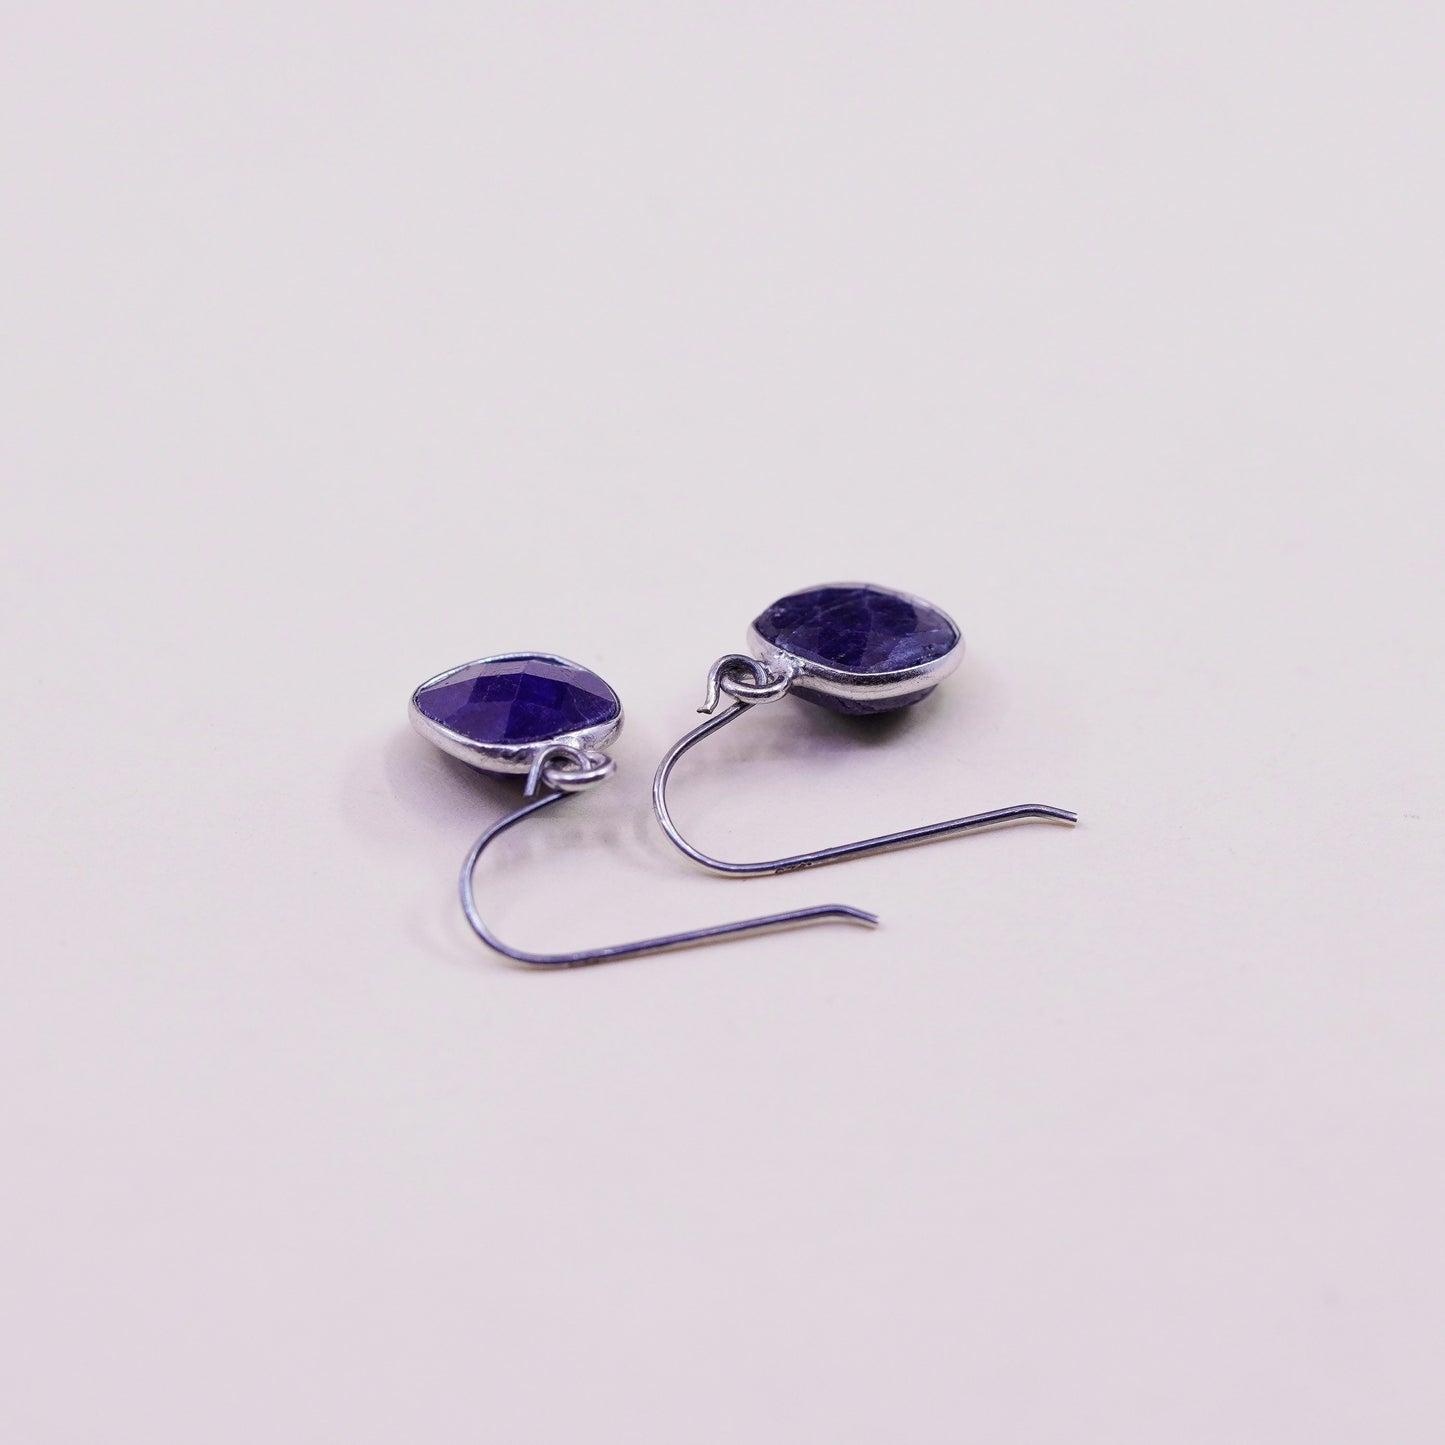 Vintage sterling silver earrings, 925 hooks with square sapphire